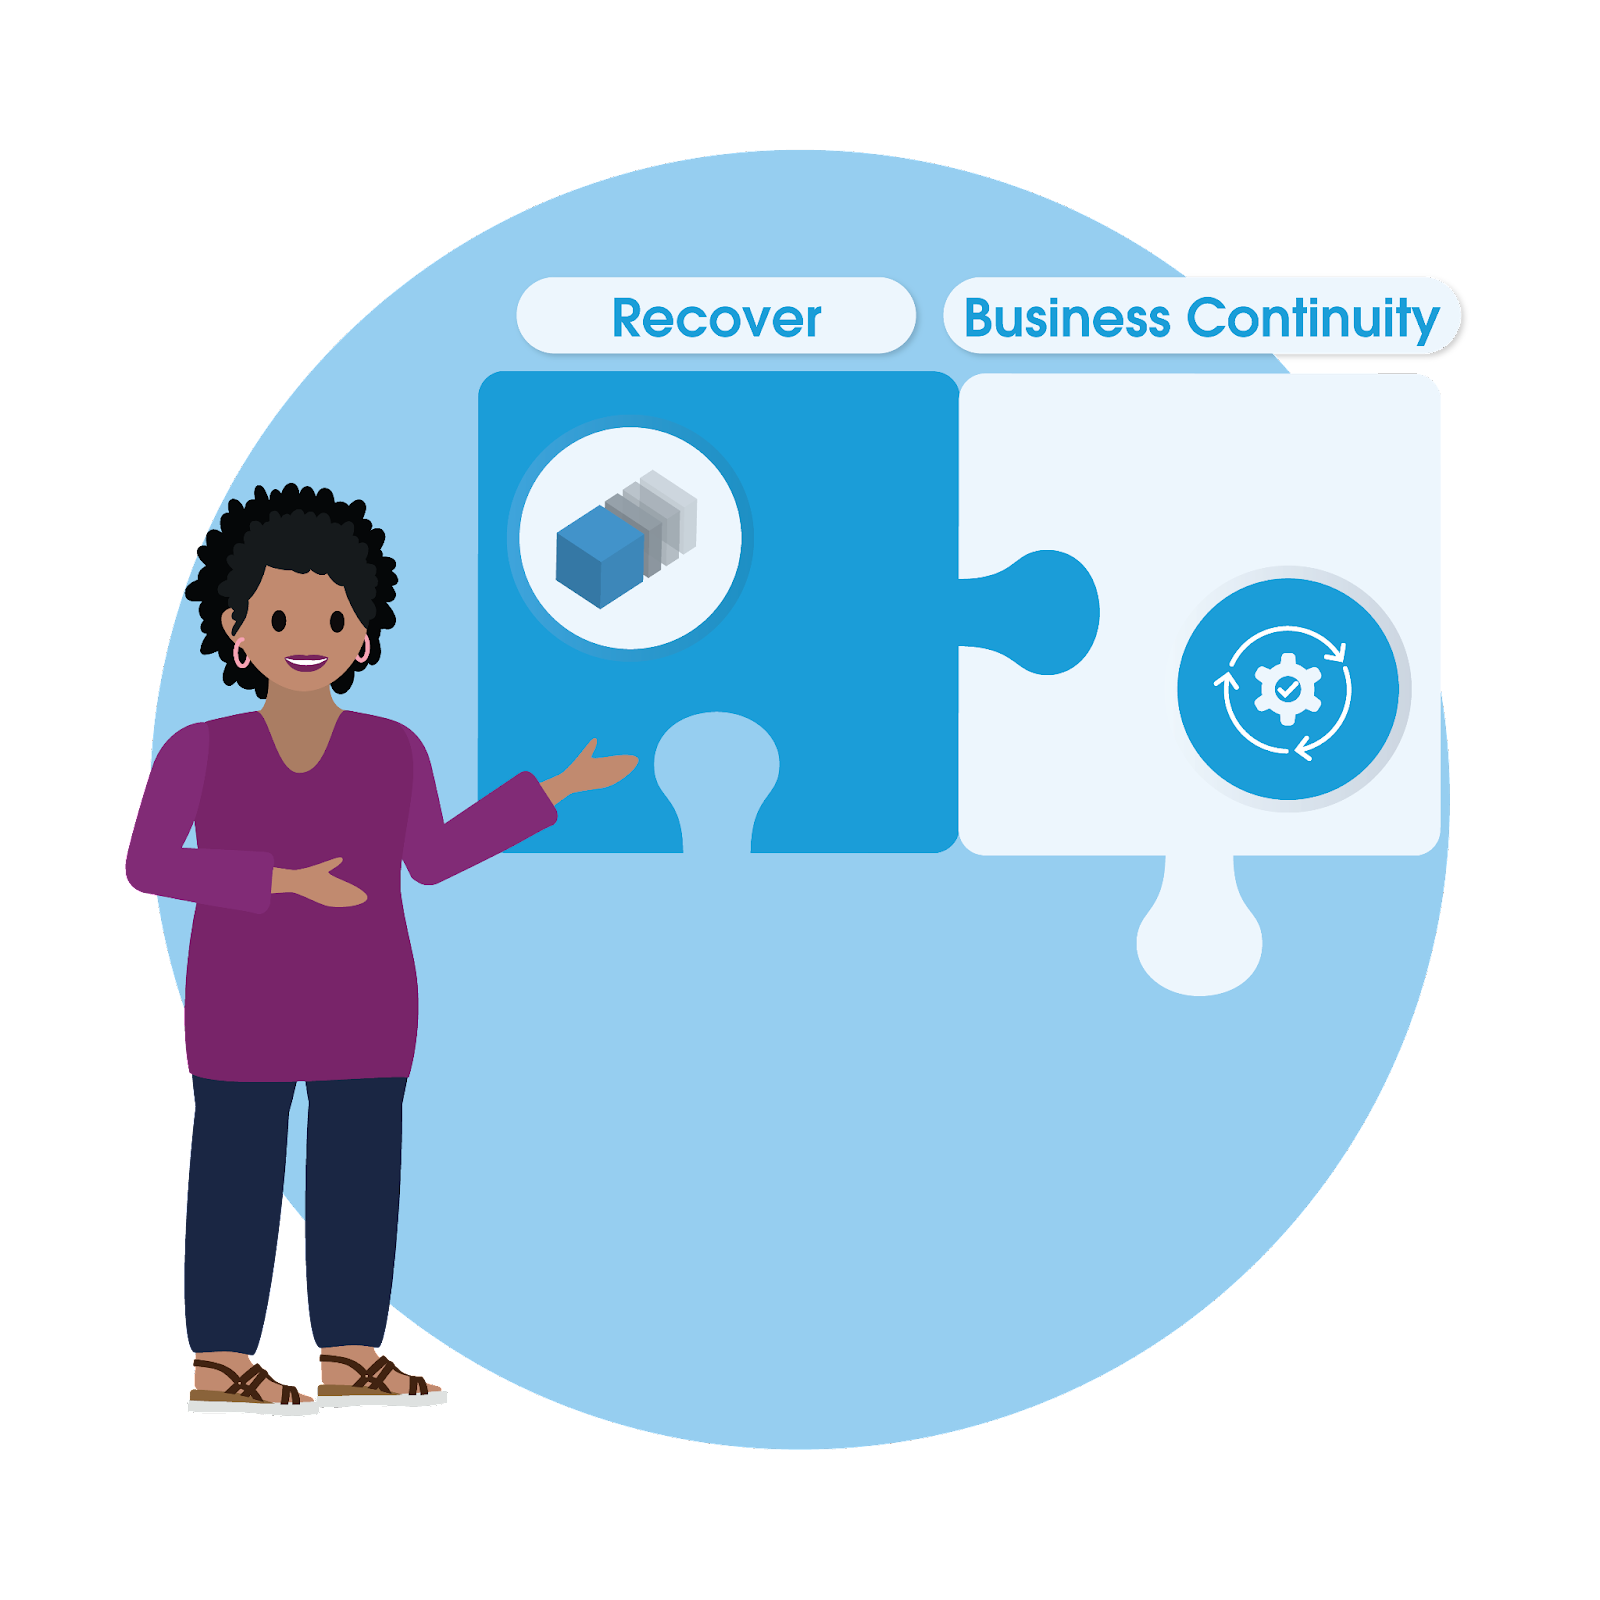 A woman standing beside two puzzle pieces that fit together; one is labeled Recover and the other is labeled Business Continuity.